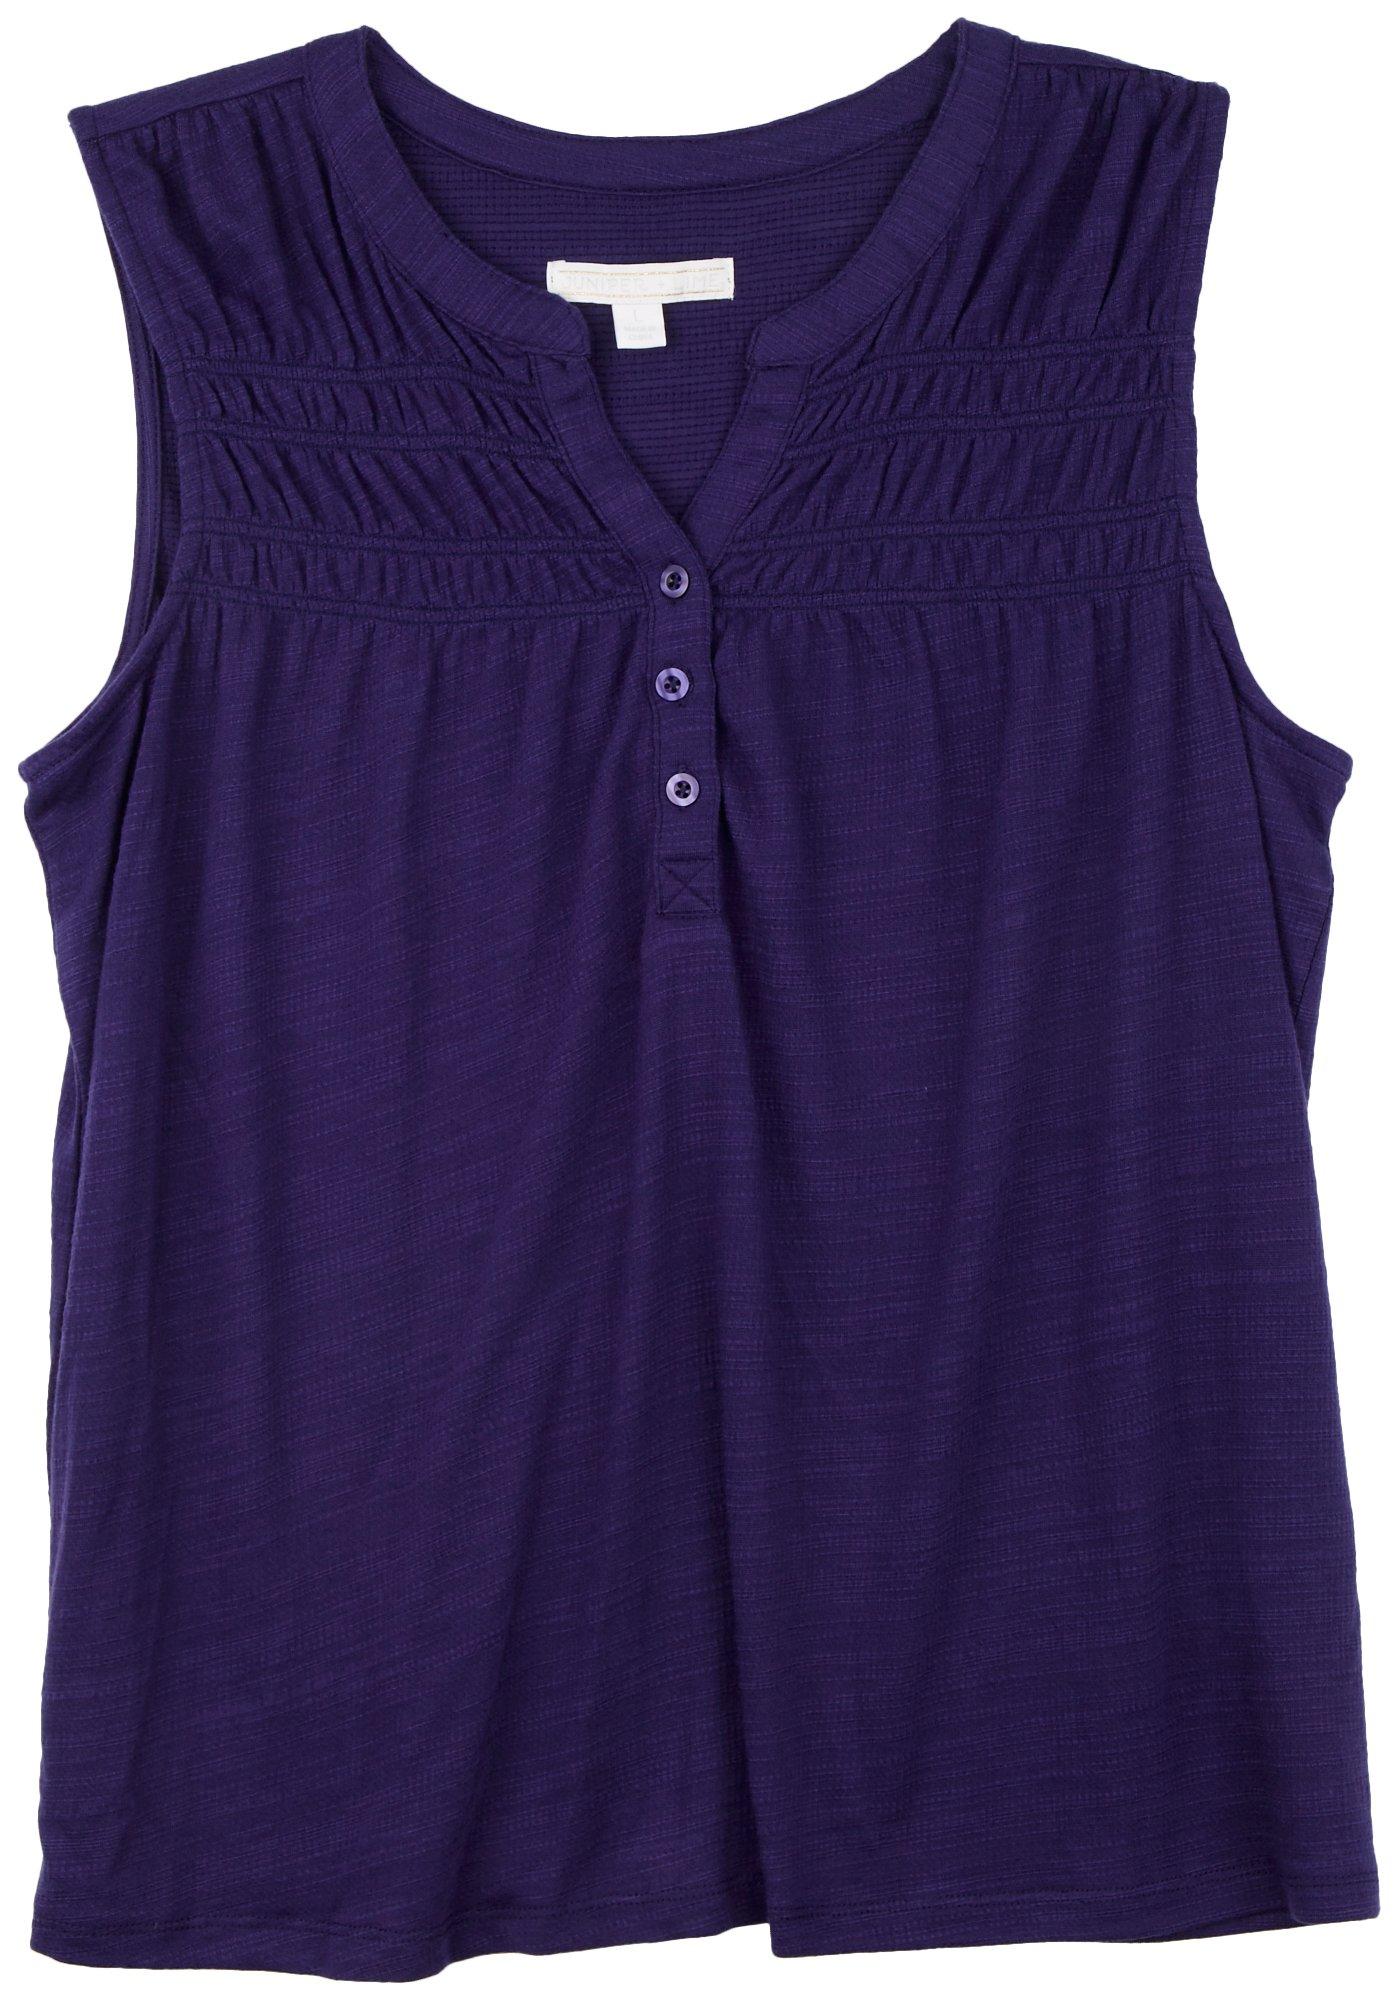 Womens Solid Textured Sleeveless Top